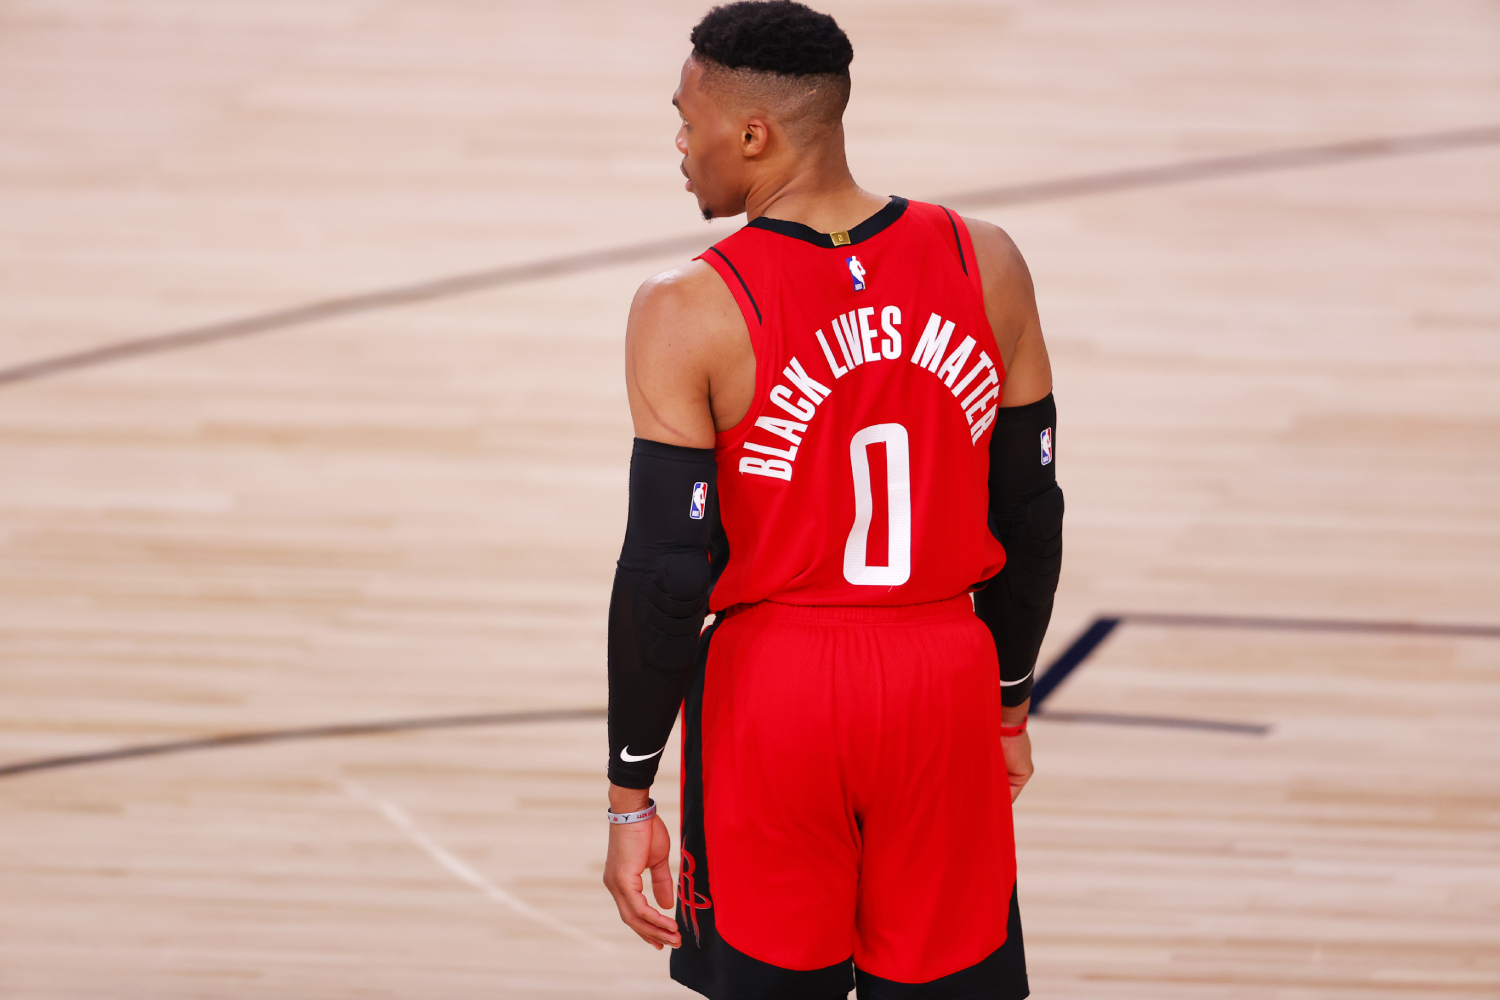 There won't be any social-justice messages on NBA jerseys this year.